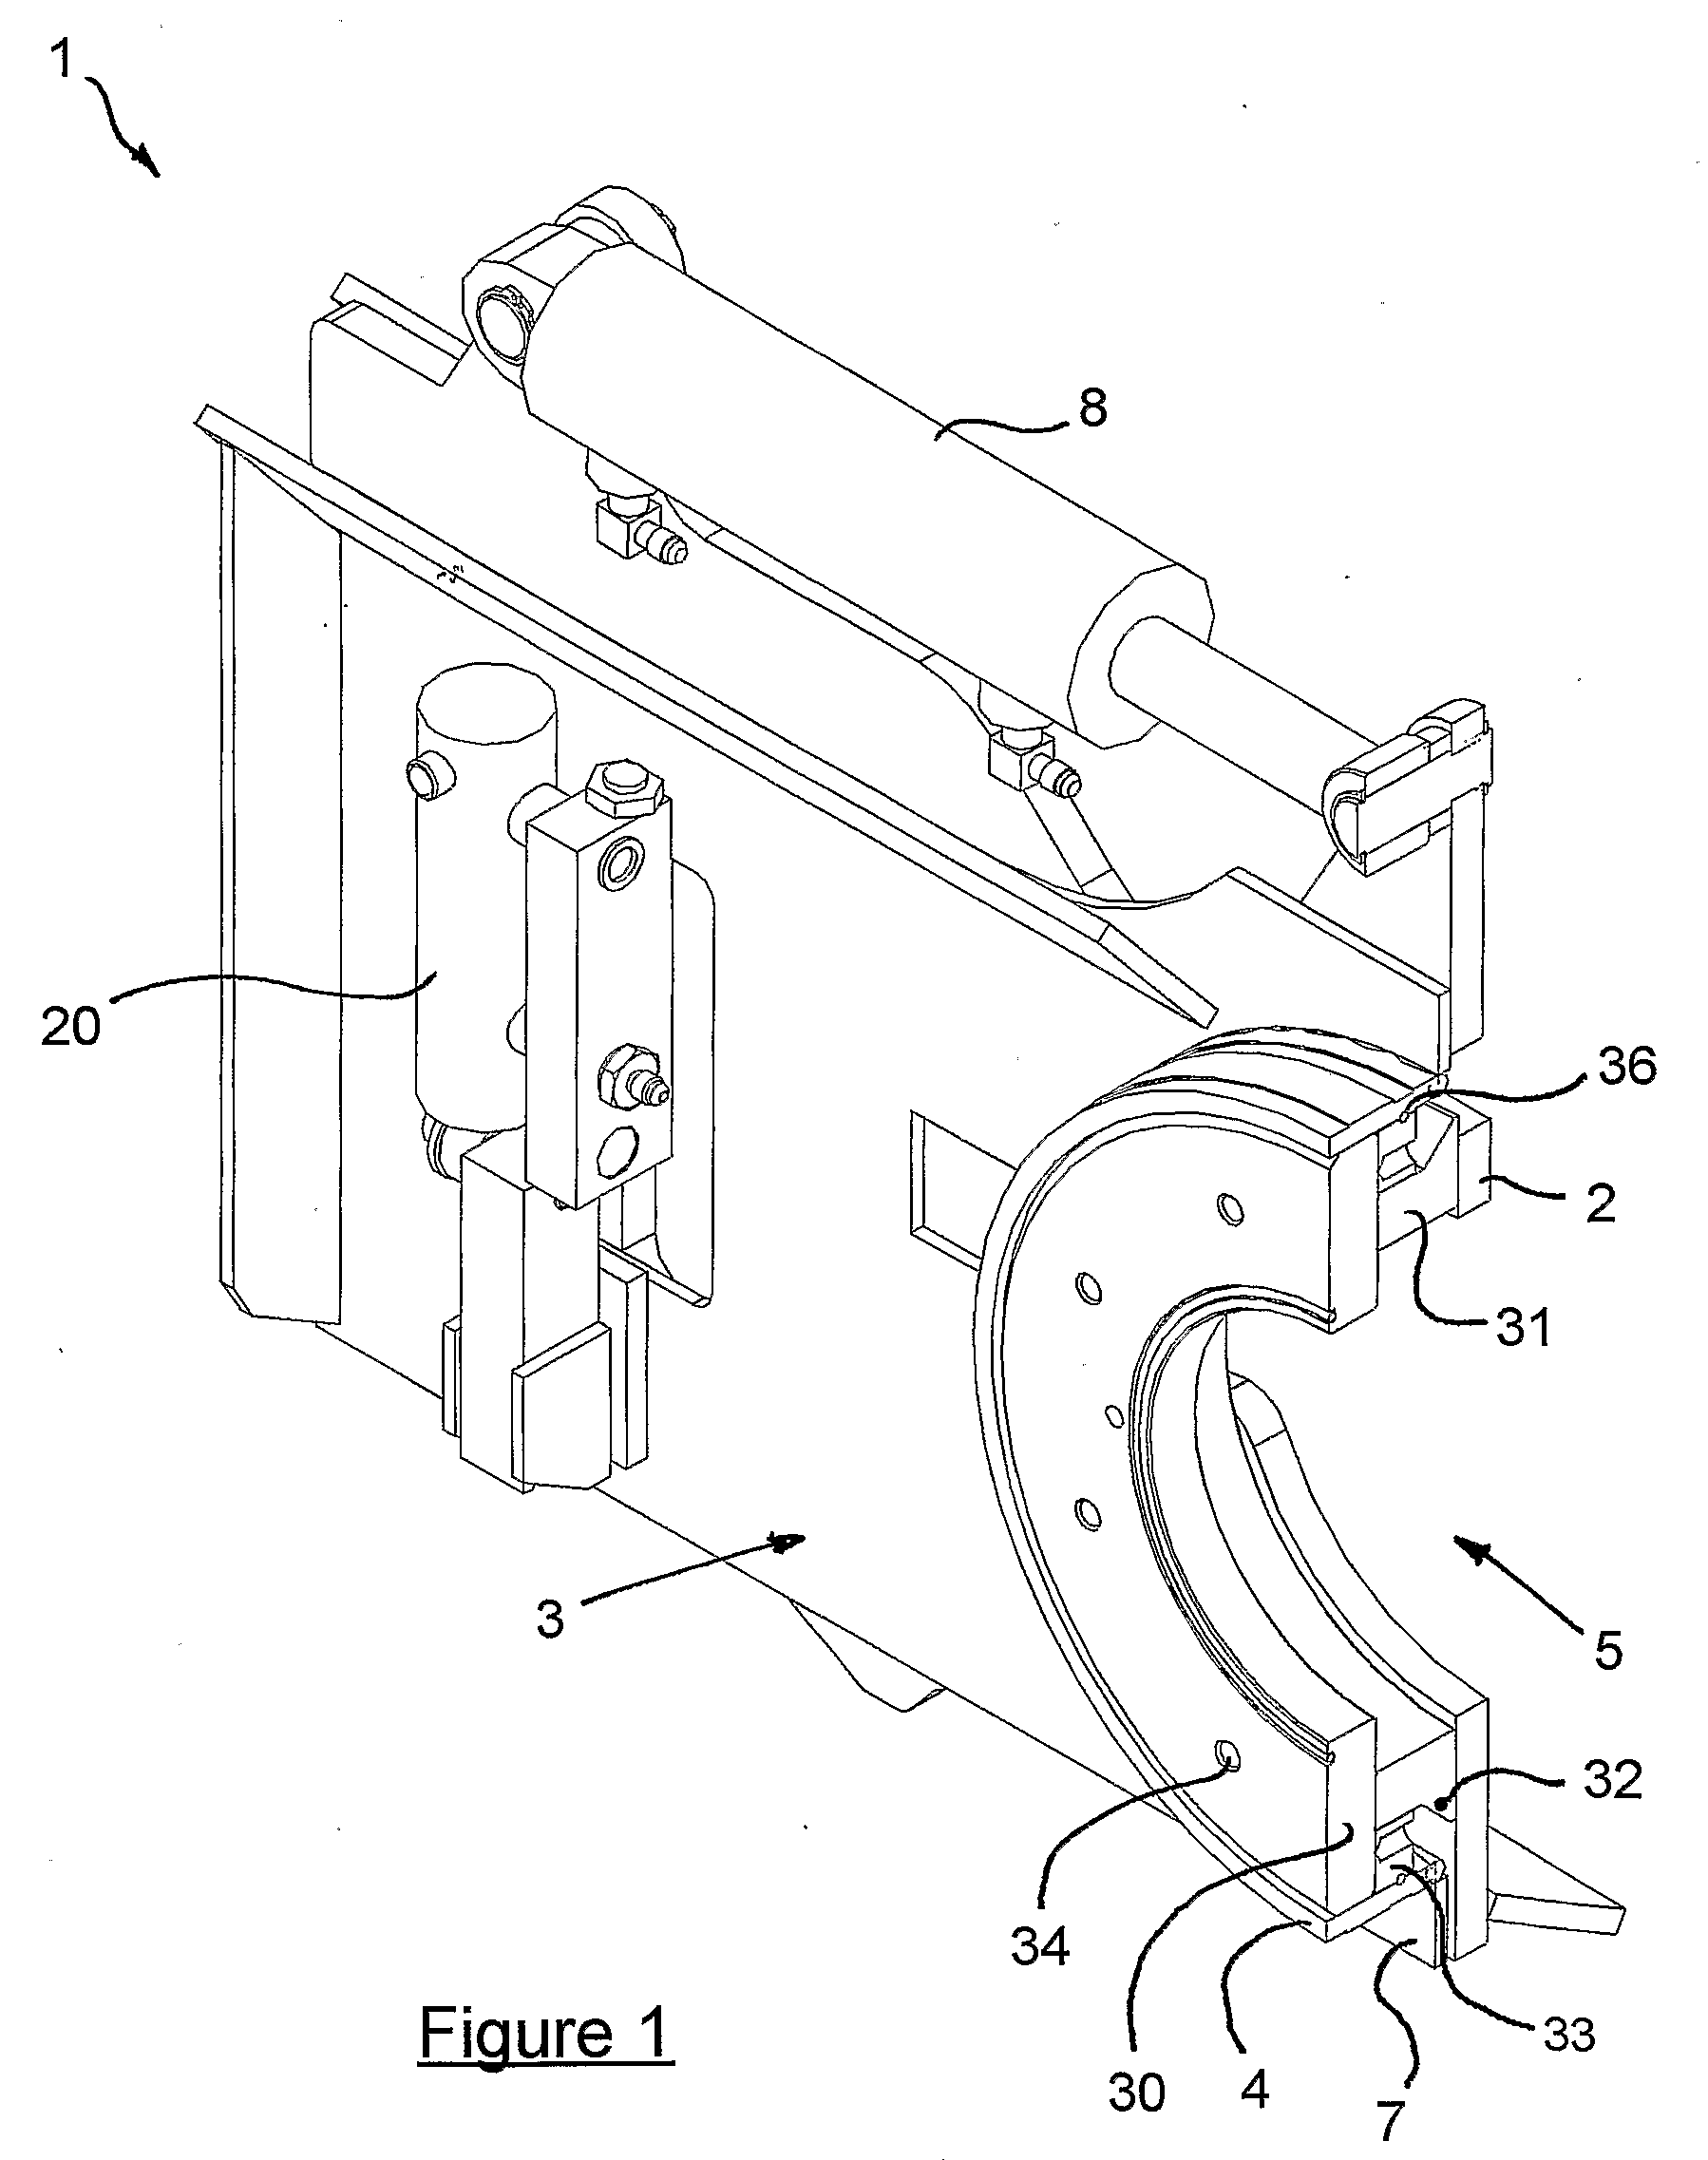 Tilting Accessory Hitch With Specific Bearing Design